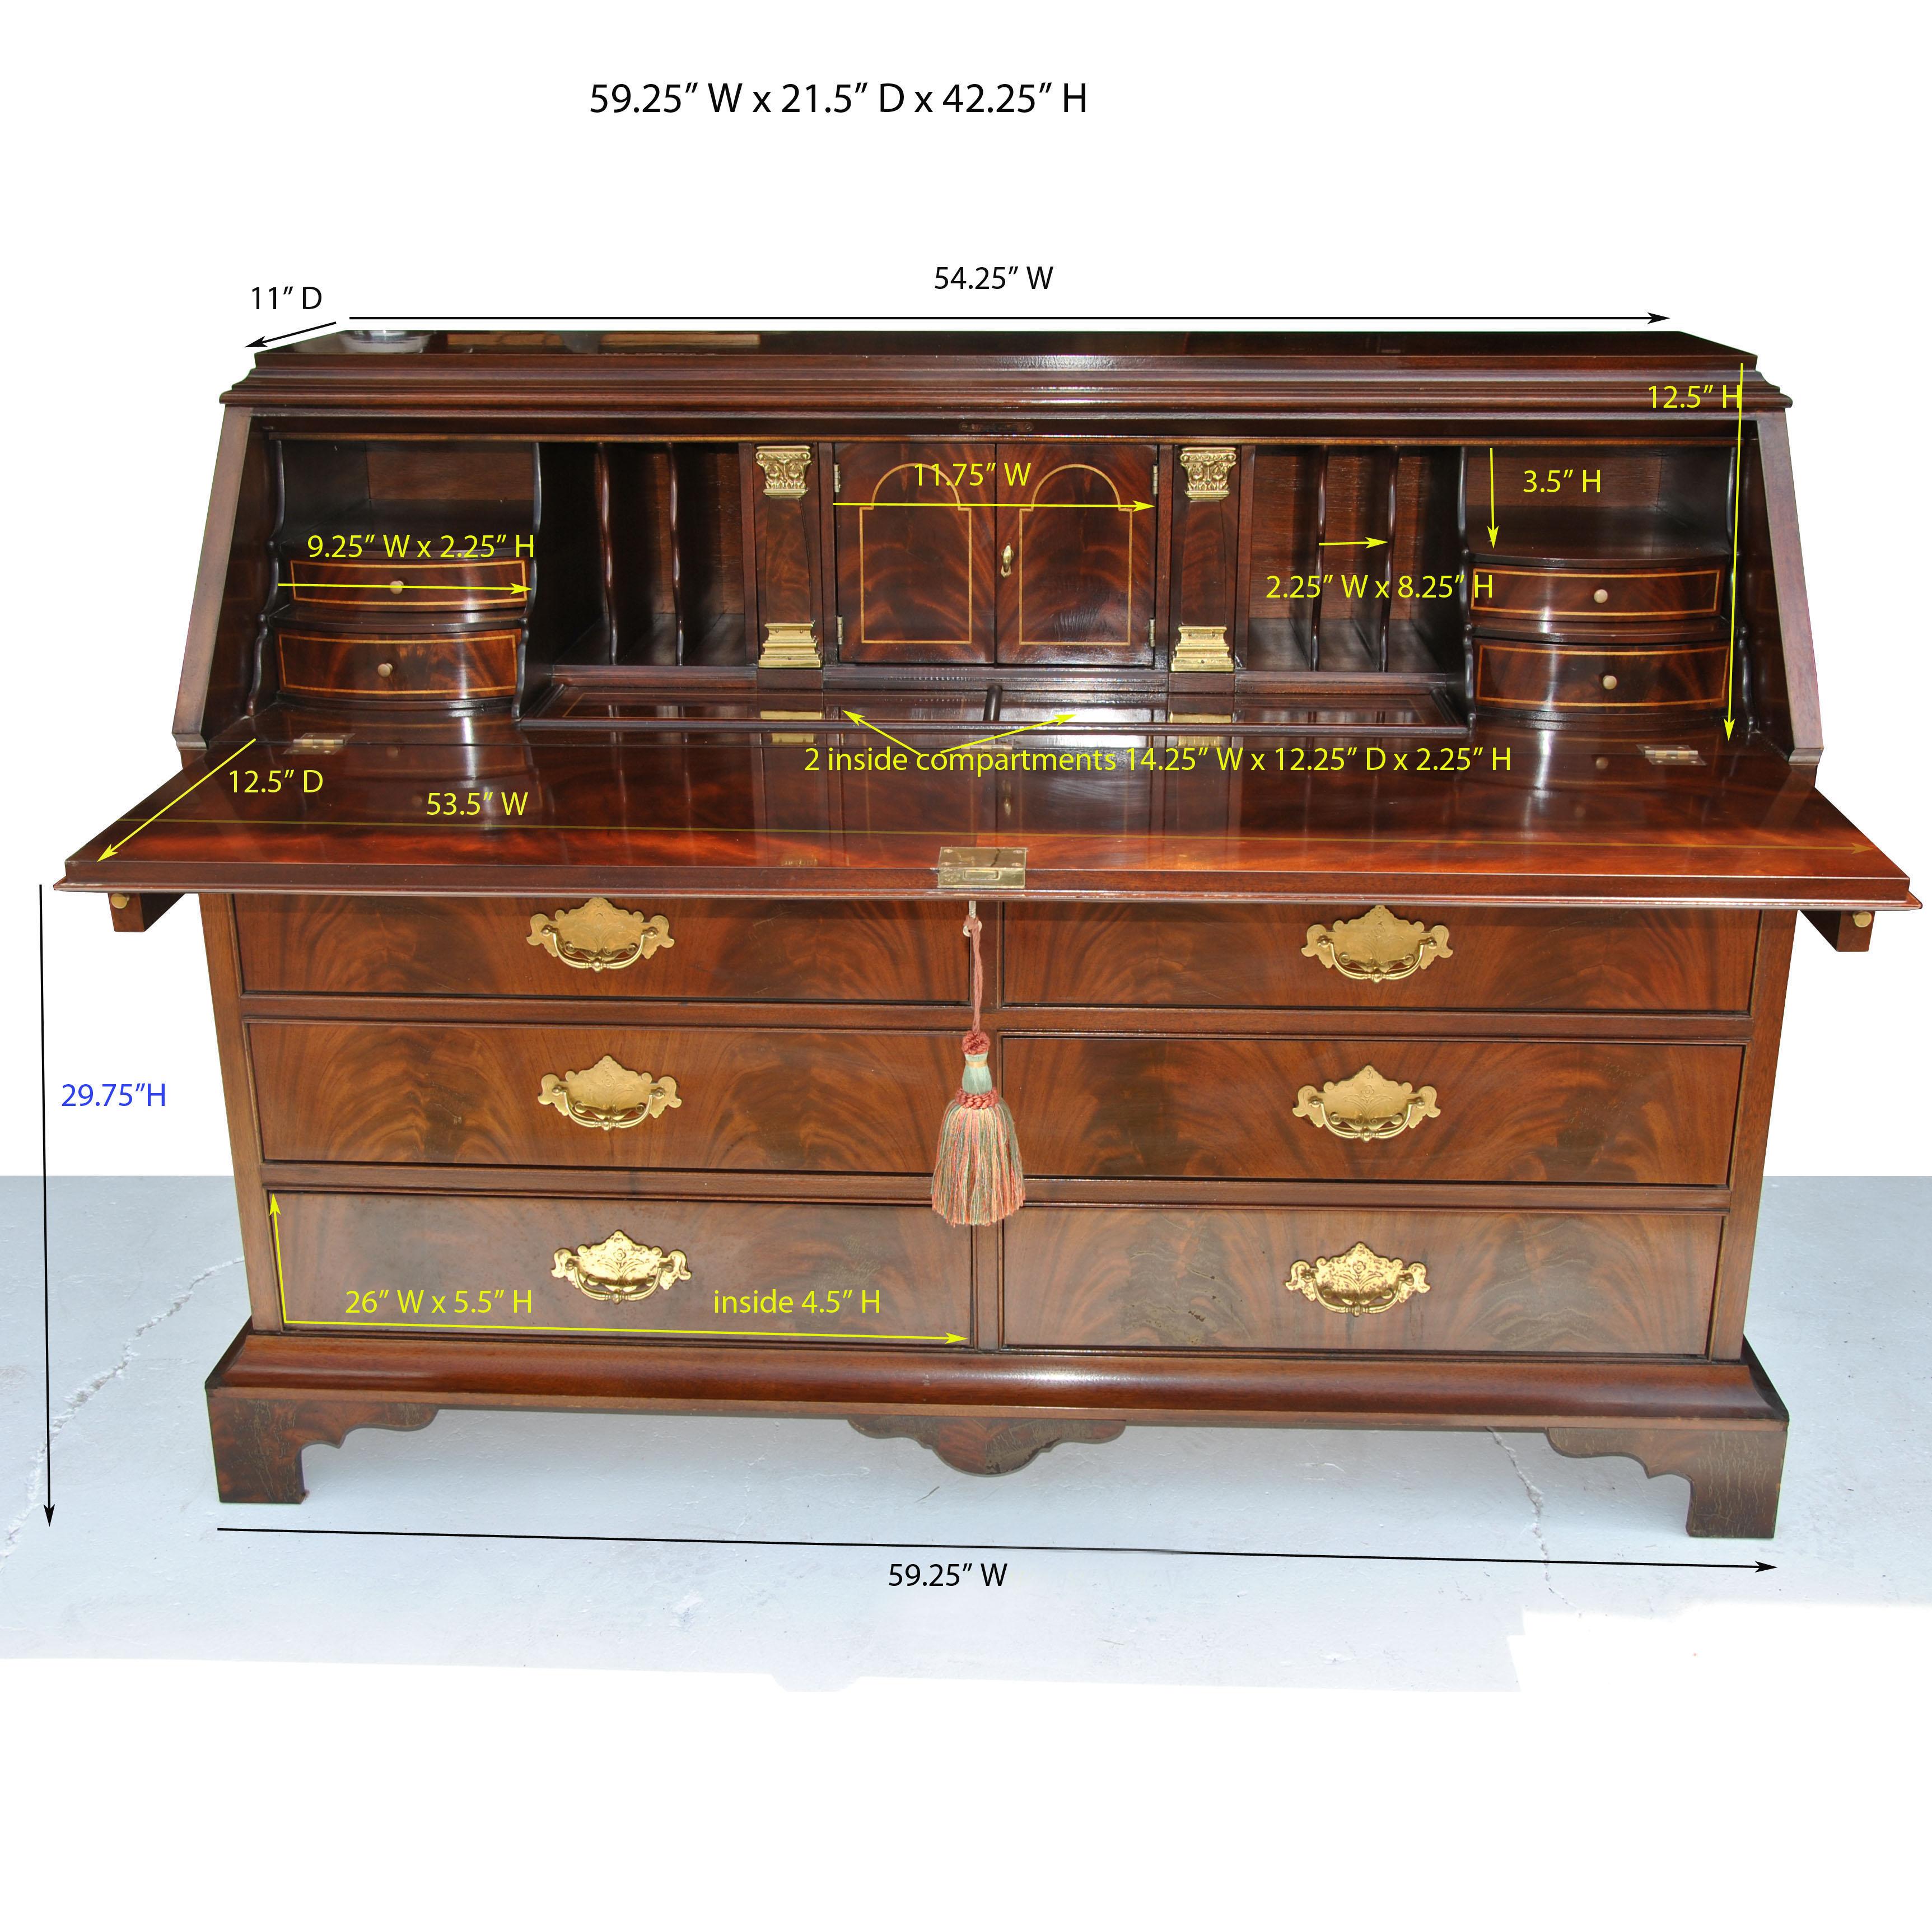 North American Chippendale Secretary Desk by Century Furniture for British National Trust